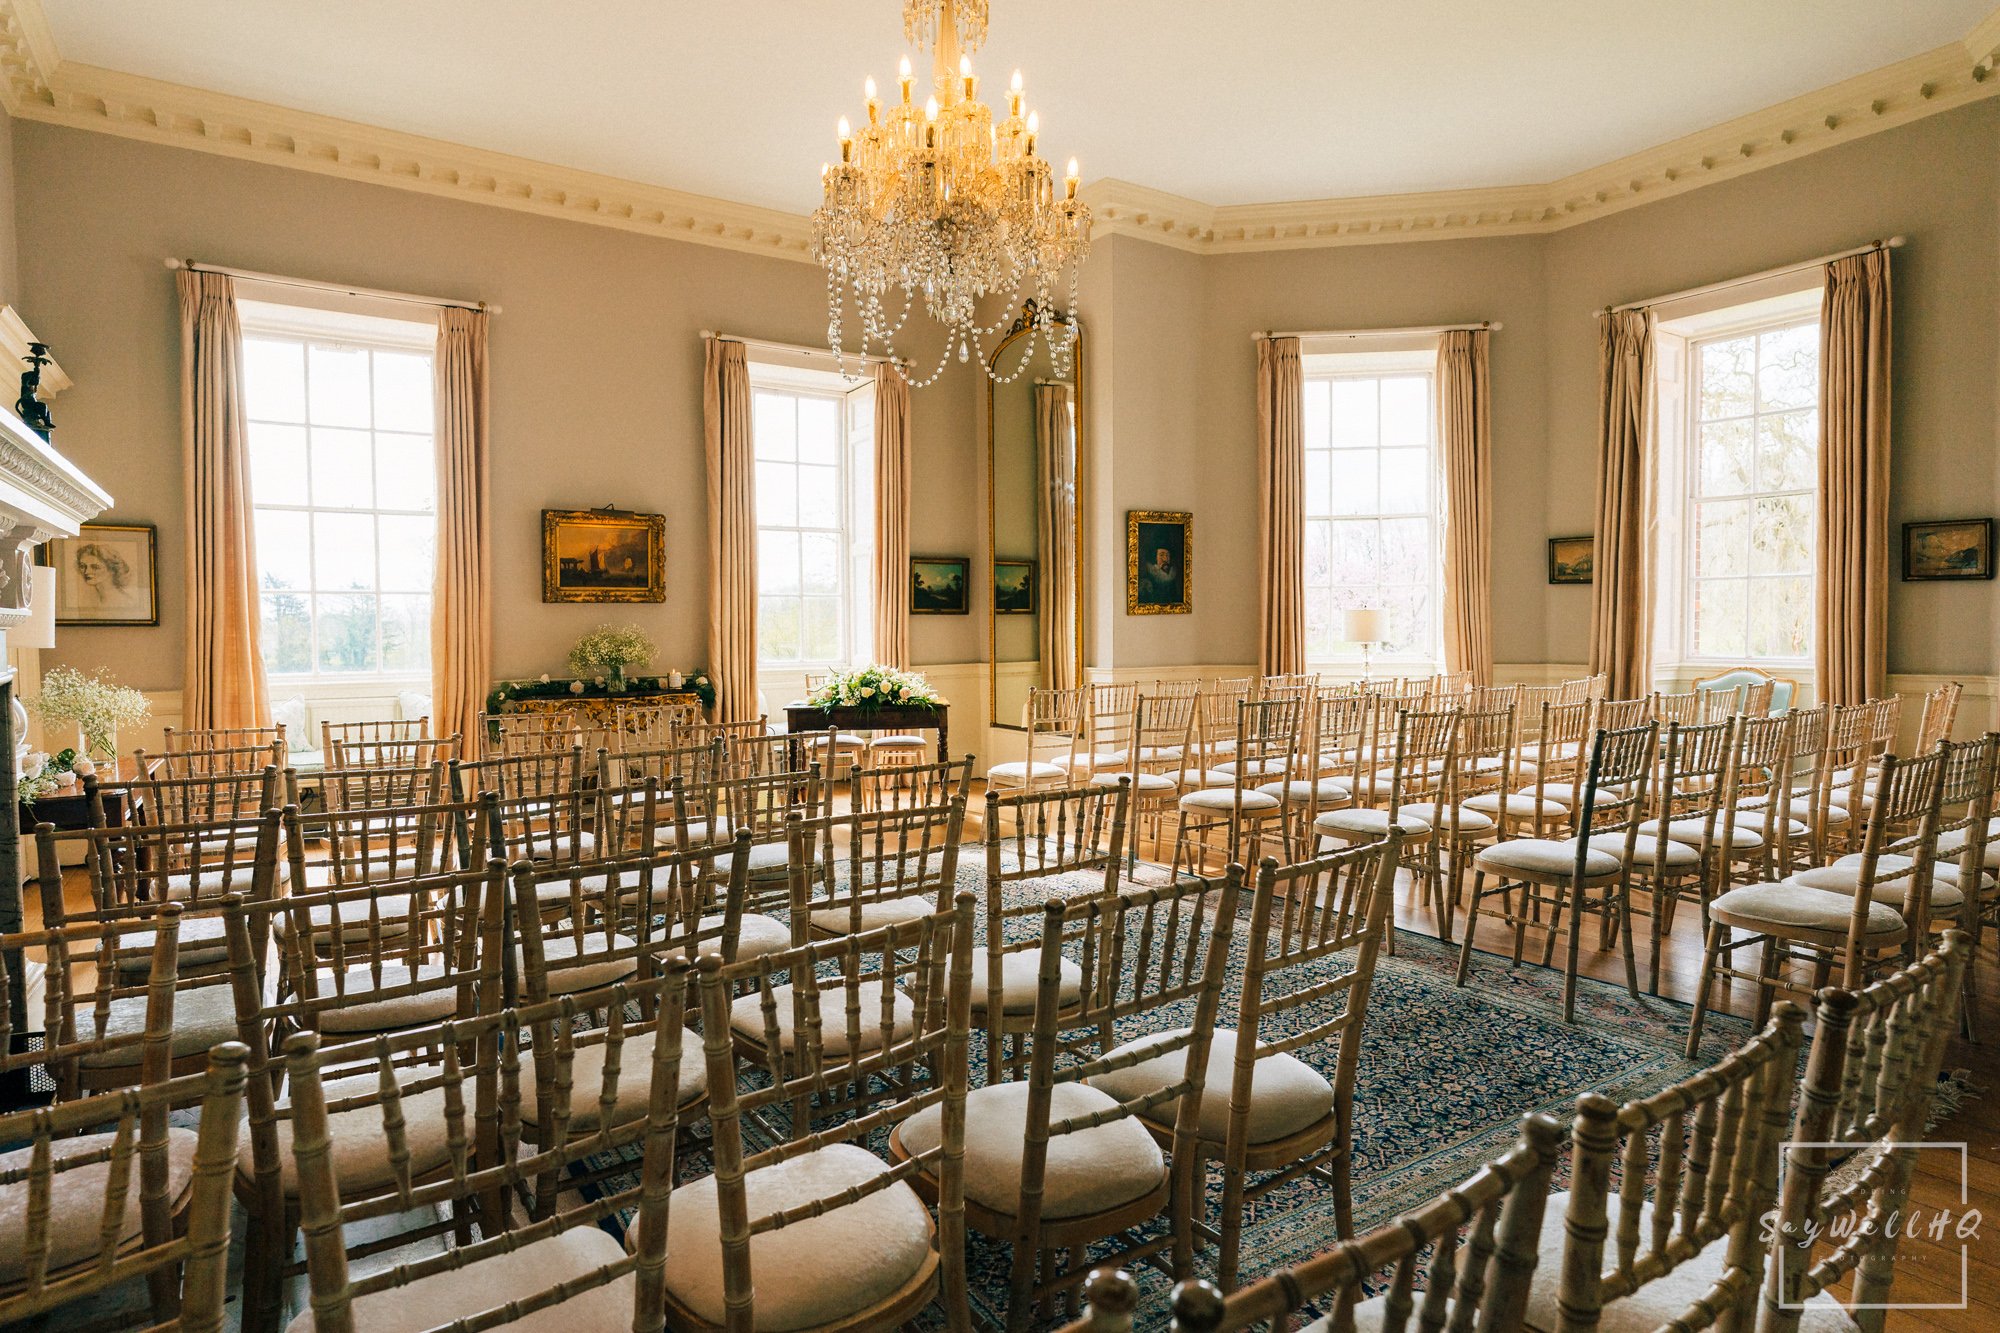 Photo of the wedding ceremony room at Norwood Park